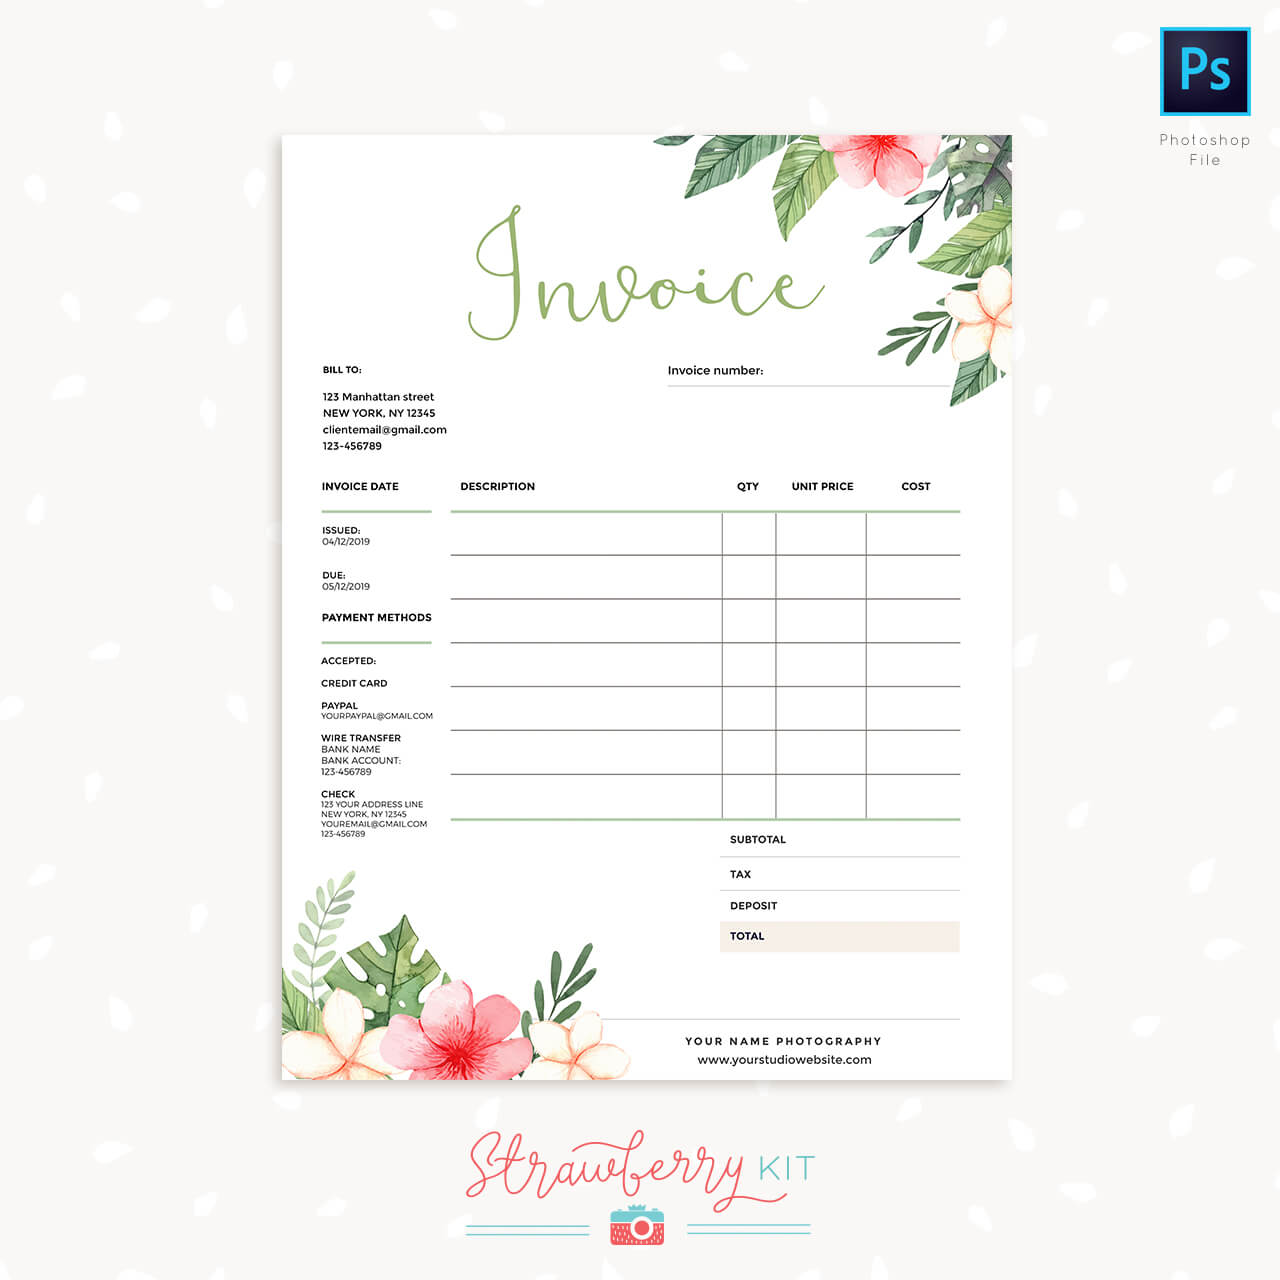 Floral Invoice Template Strawberry Kit